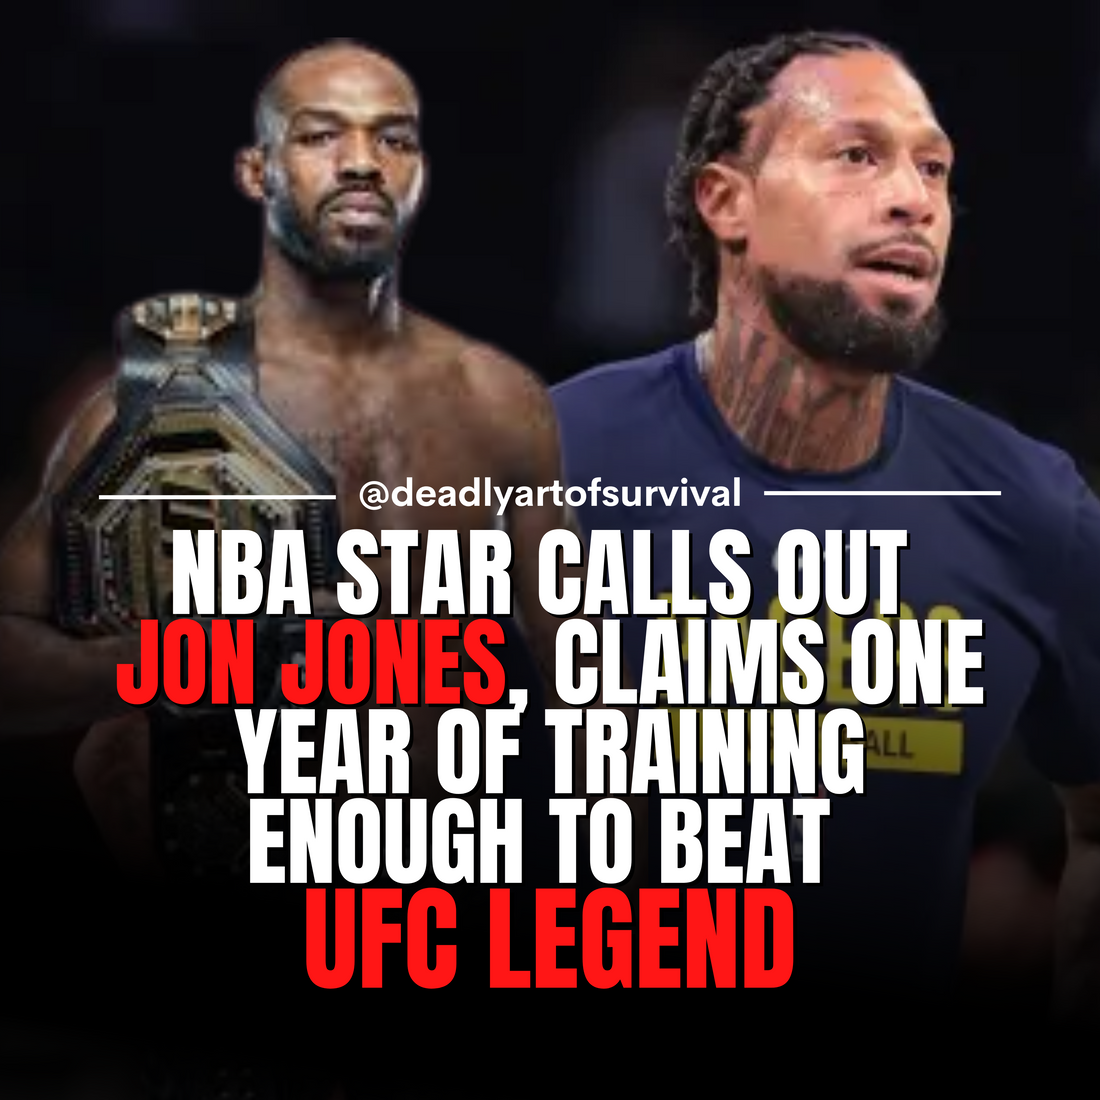 NBA Star Issues Unusual Challenge to Jon Jones, Believes One Year of Training is Enough to Beat UFC Legend